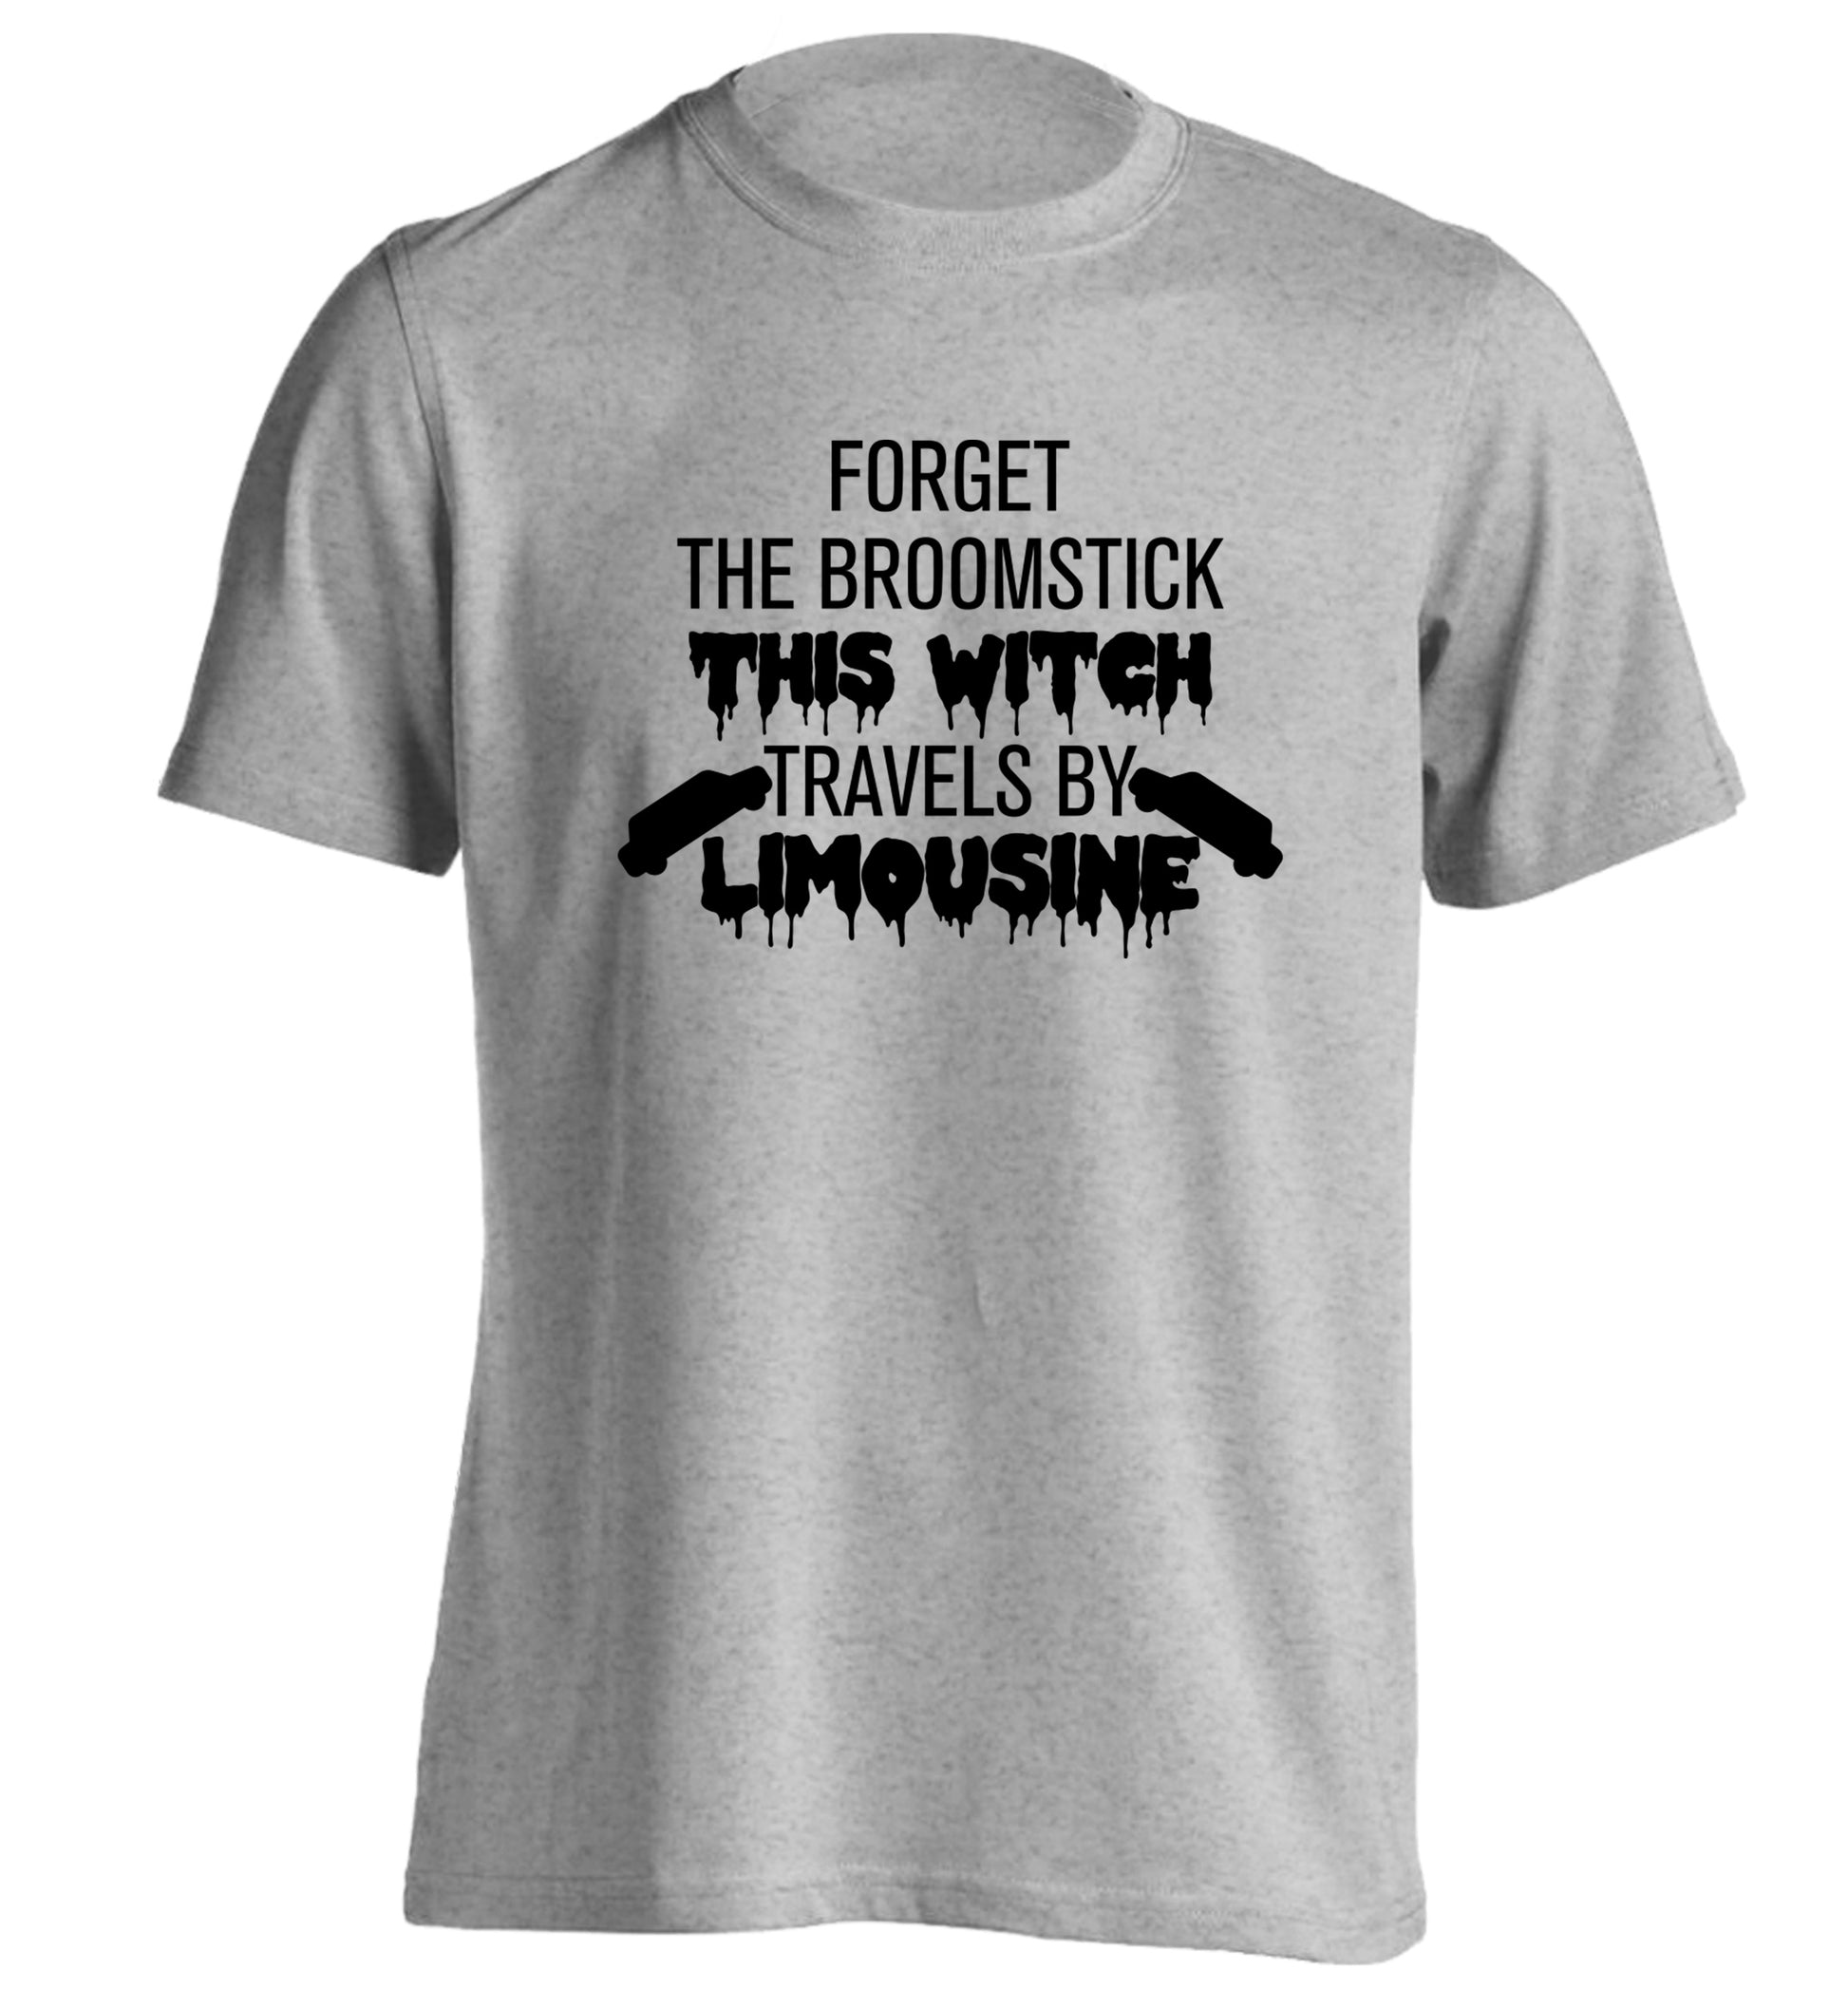 Forget the broomstick this witch travels by limousine adults unisexgrey Tshirt 2XL